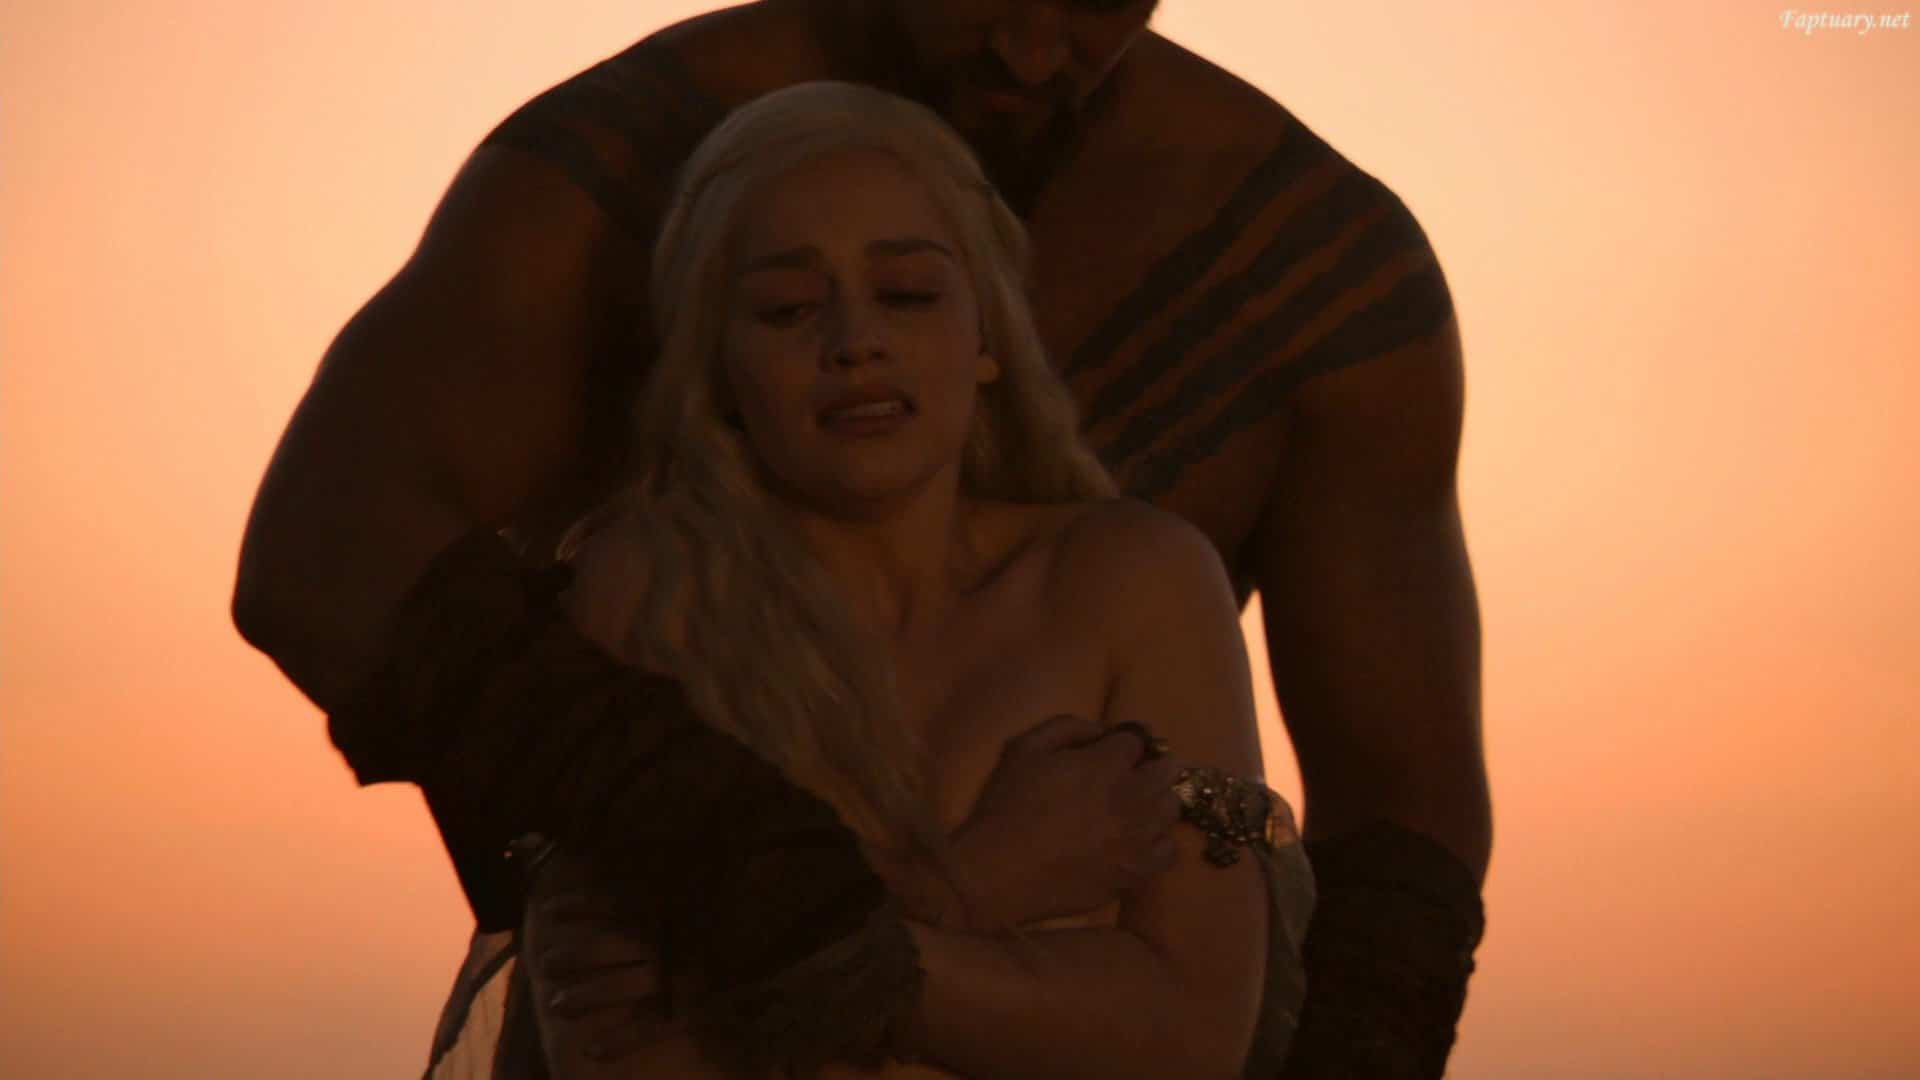 Emilia Clarke being restrained by a man